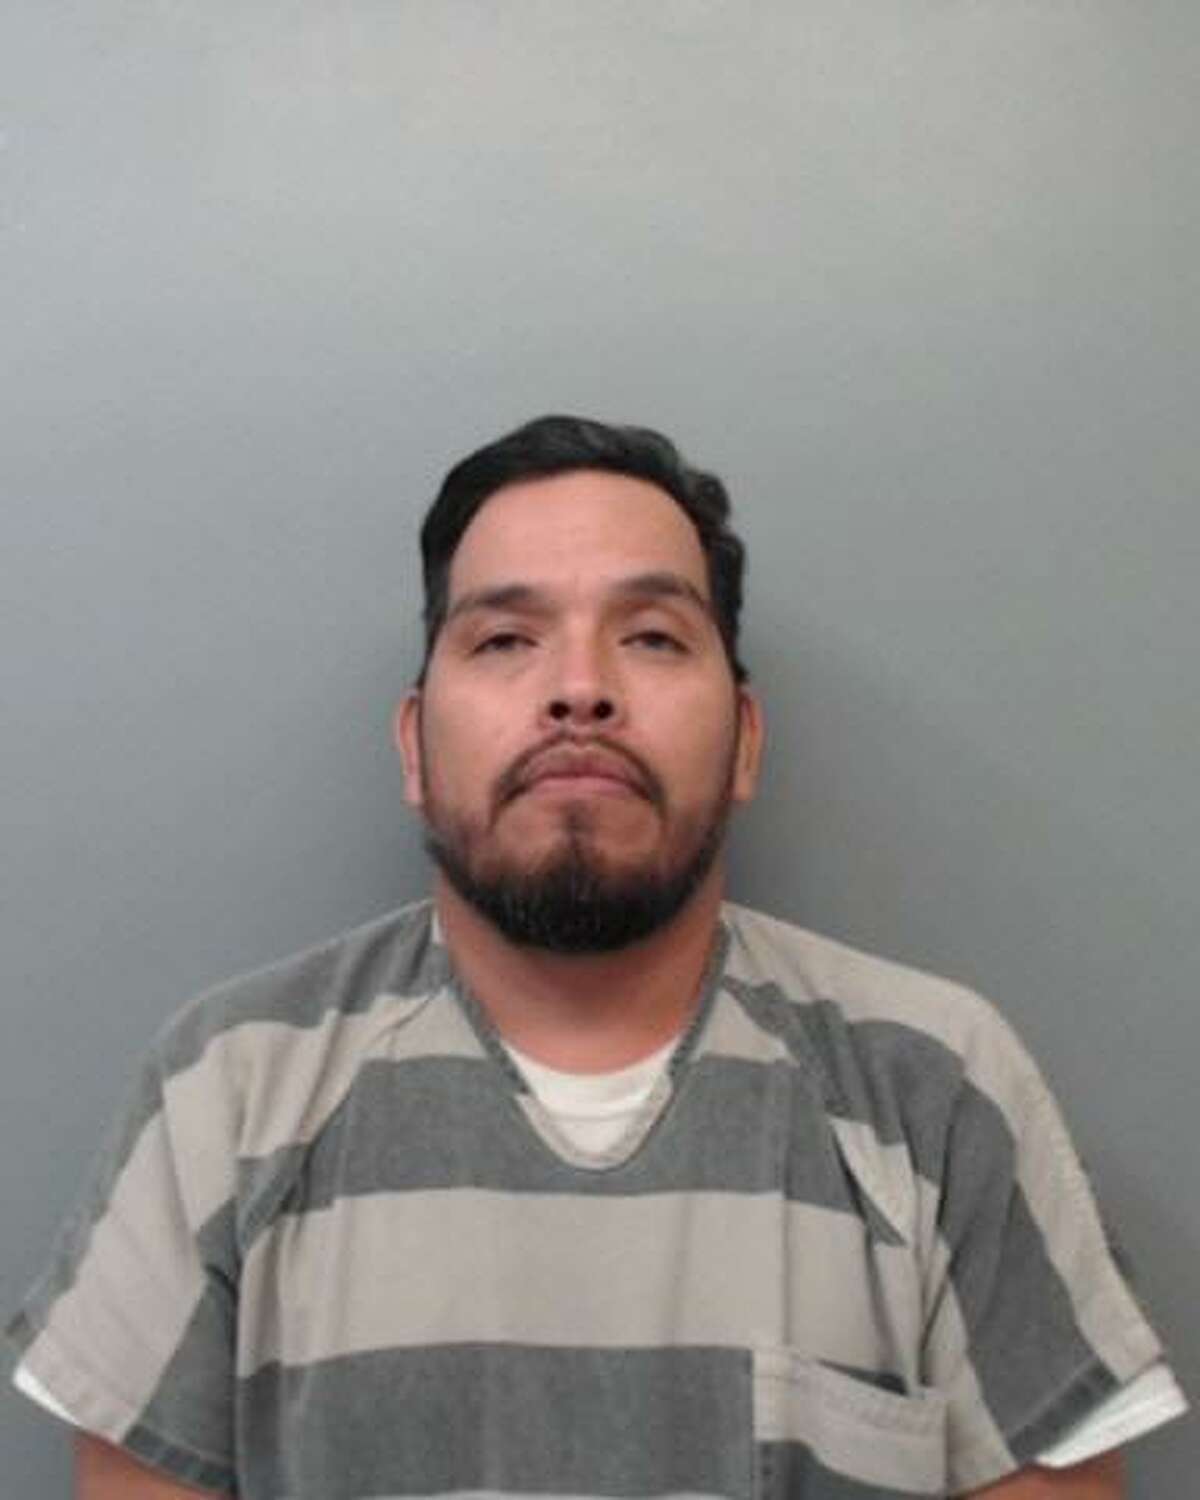 Jose F. Morales, 42, was arrested on charges of abuse of official capacity.